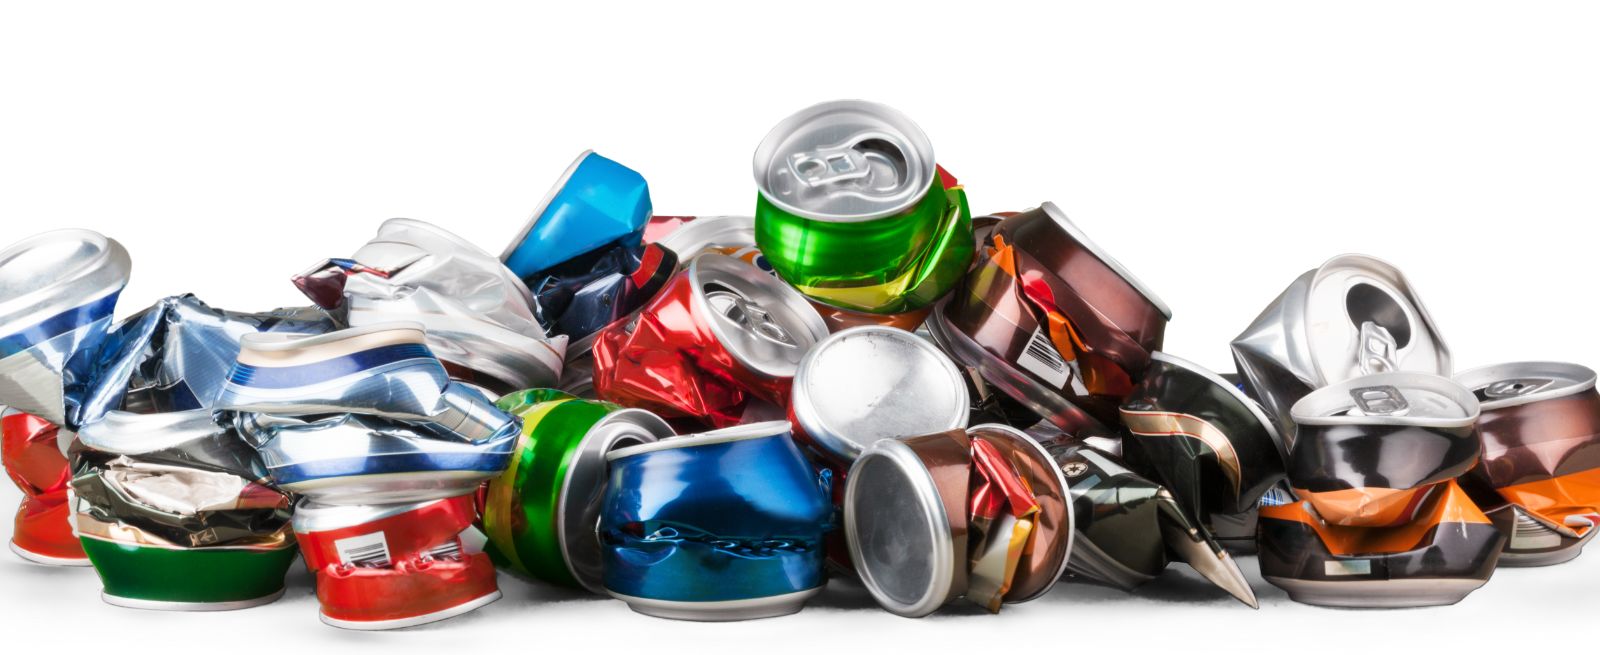 Crushed cans image